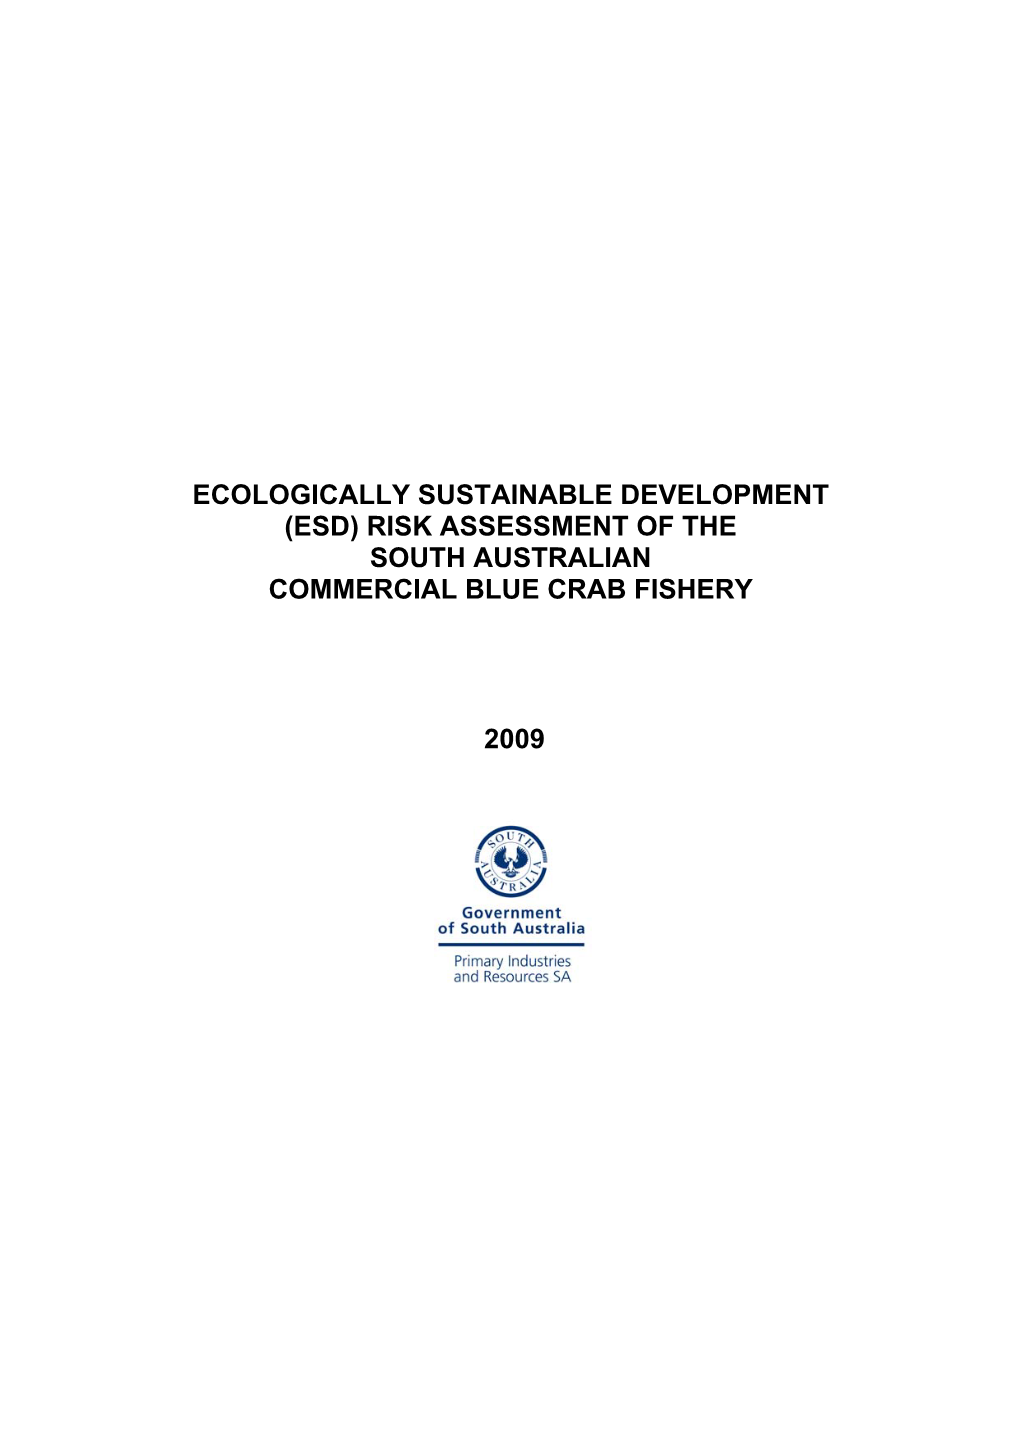 Ecologically Sustainable Development (Esd) Risk Assessment of the South Australian Commercial Blue Crab Fishery